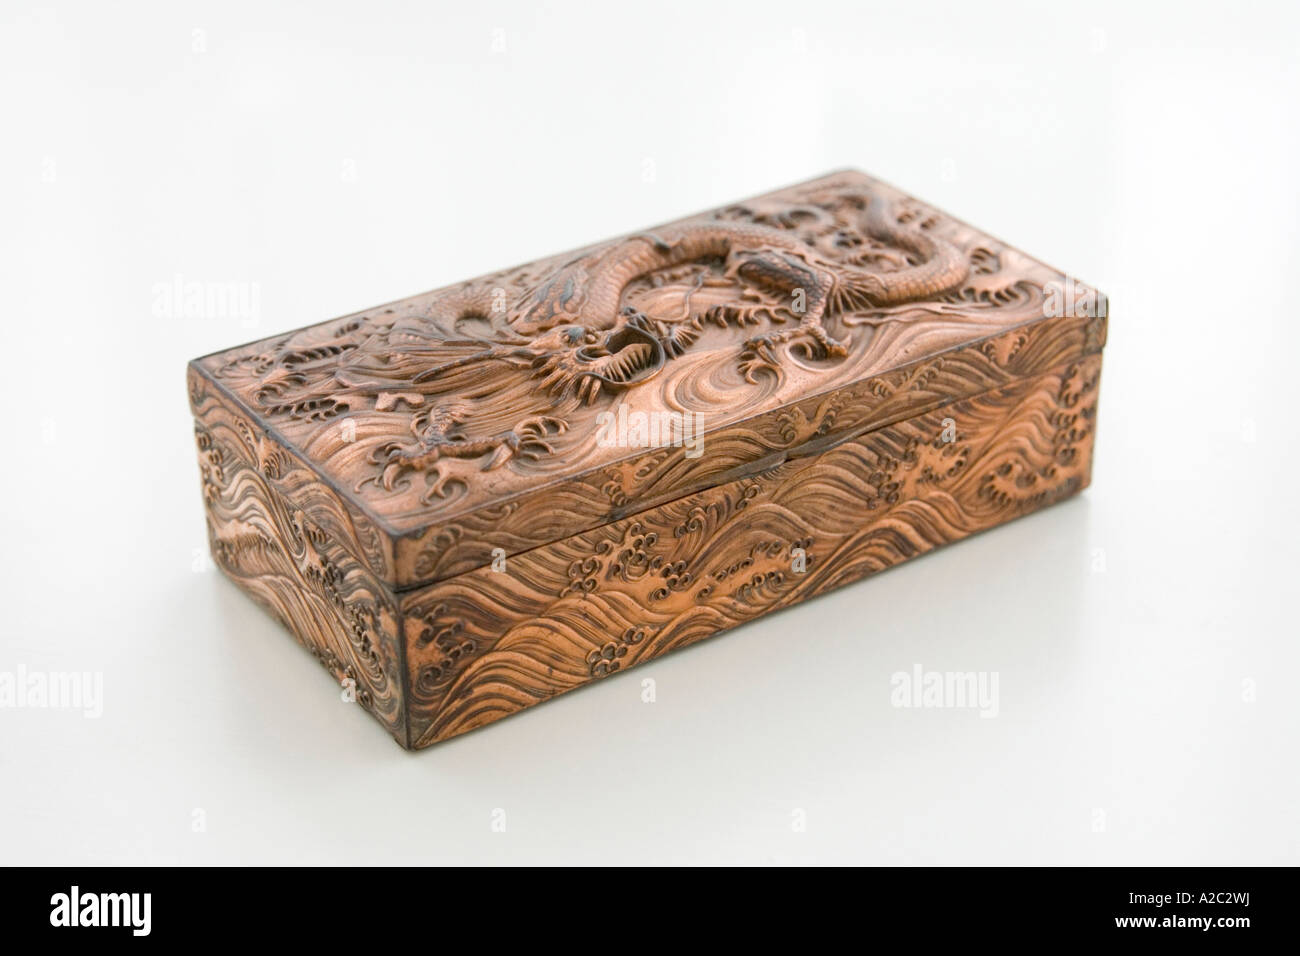 bronze/copper case with carvings of ancient dragon / serpent scene Stock Photo